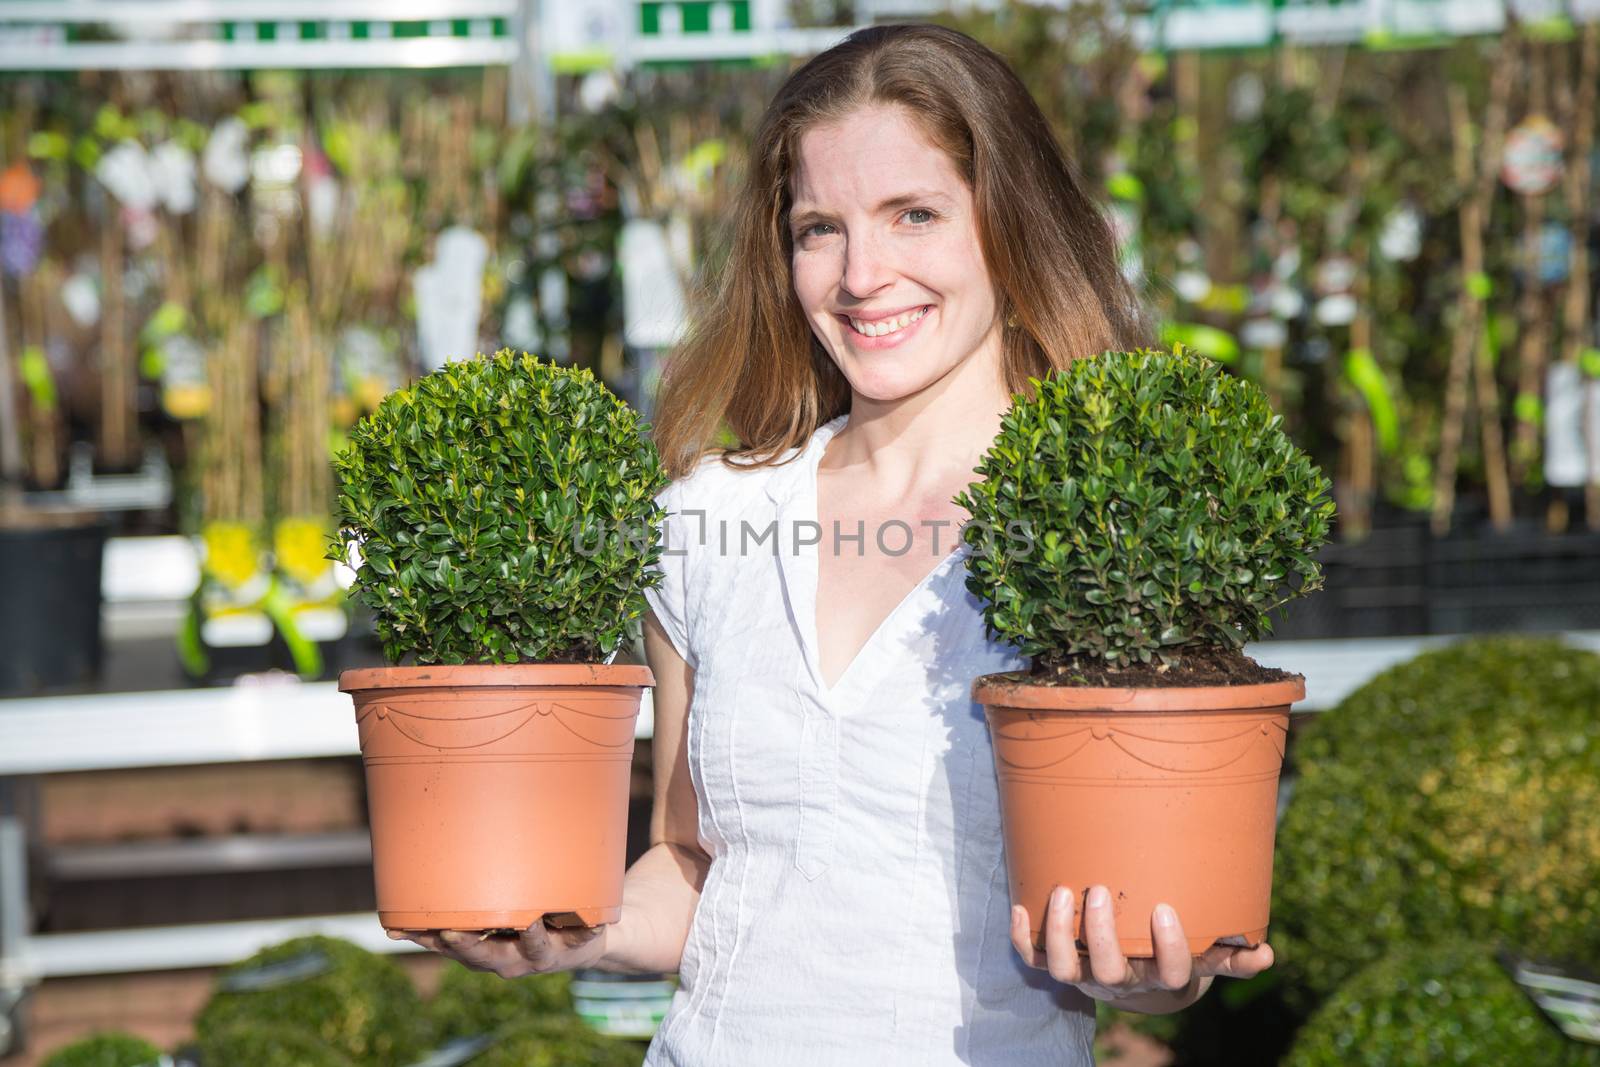 Customer or client in garden center posing with two boxtrees